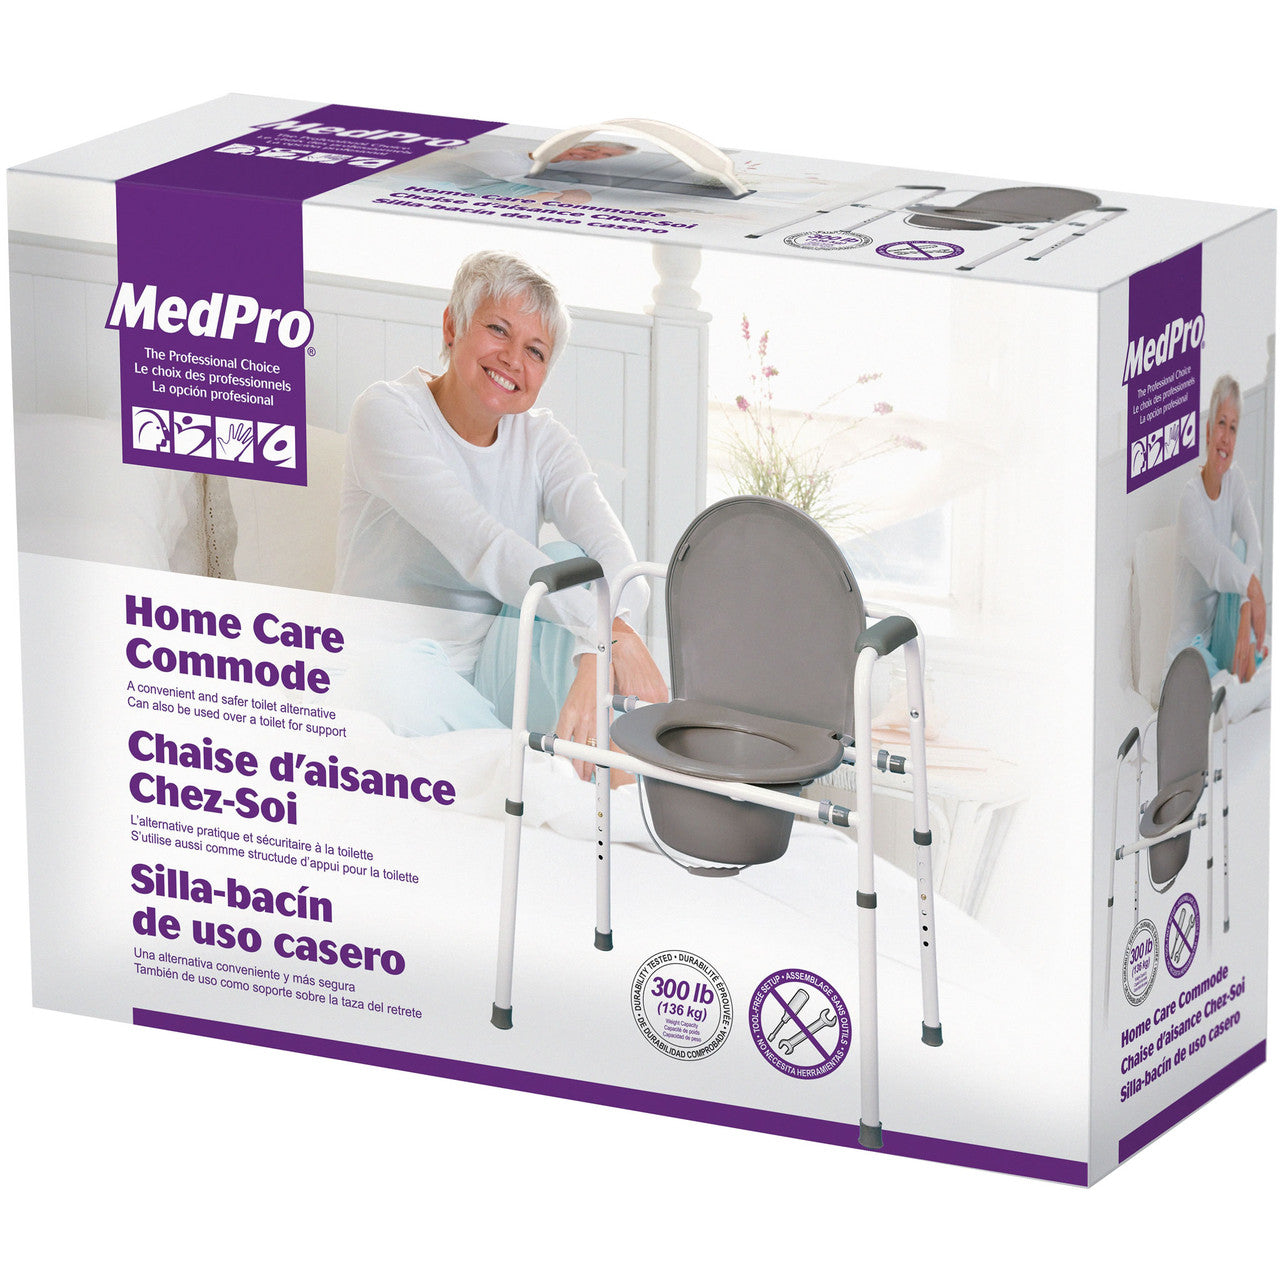 Commode MedPro Homecare, AMG